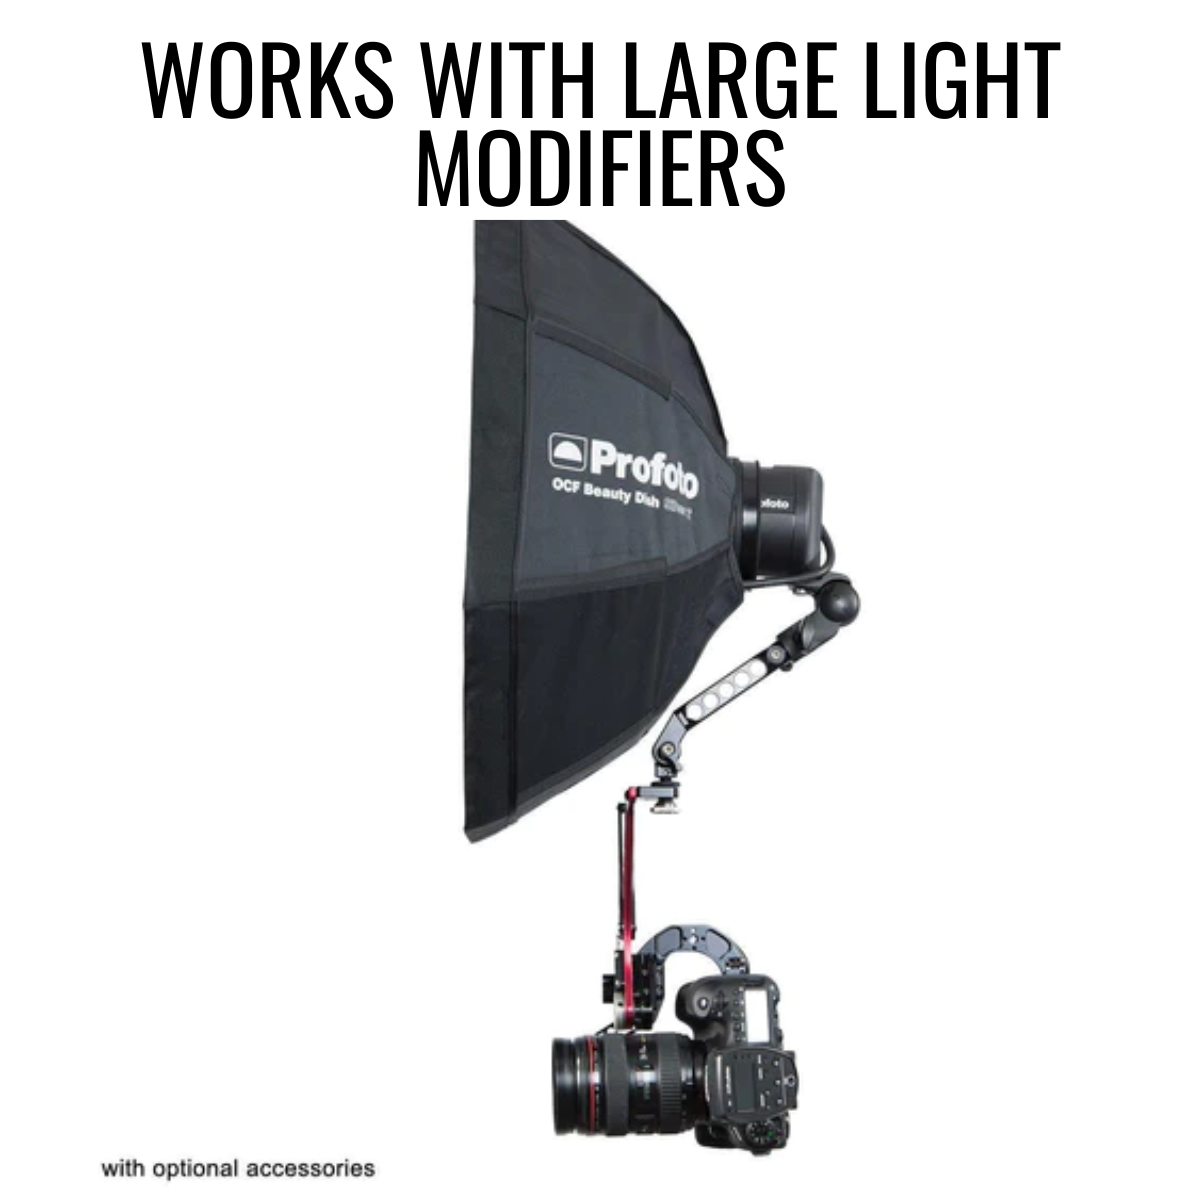 BBGV2 with large light modifiers